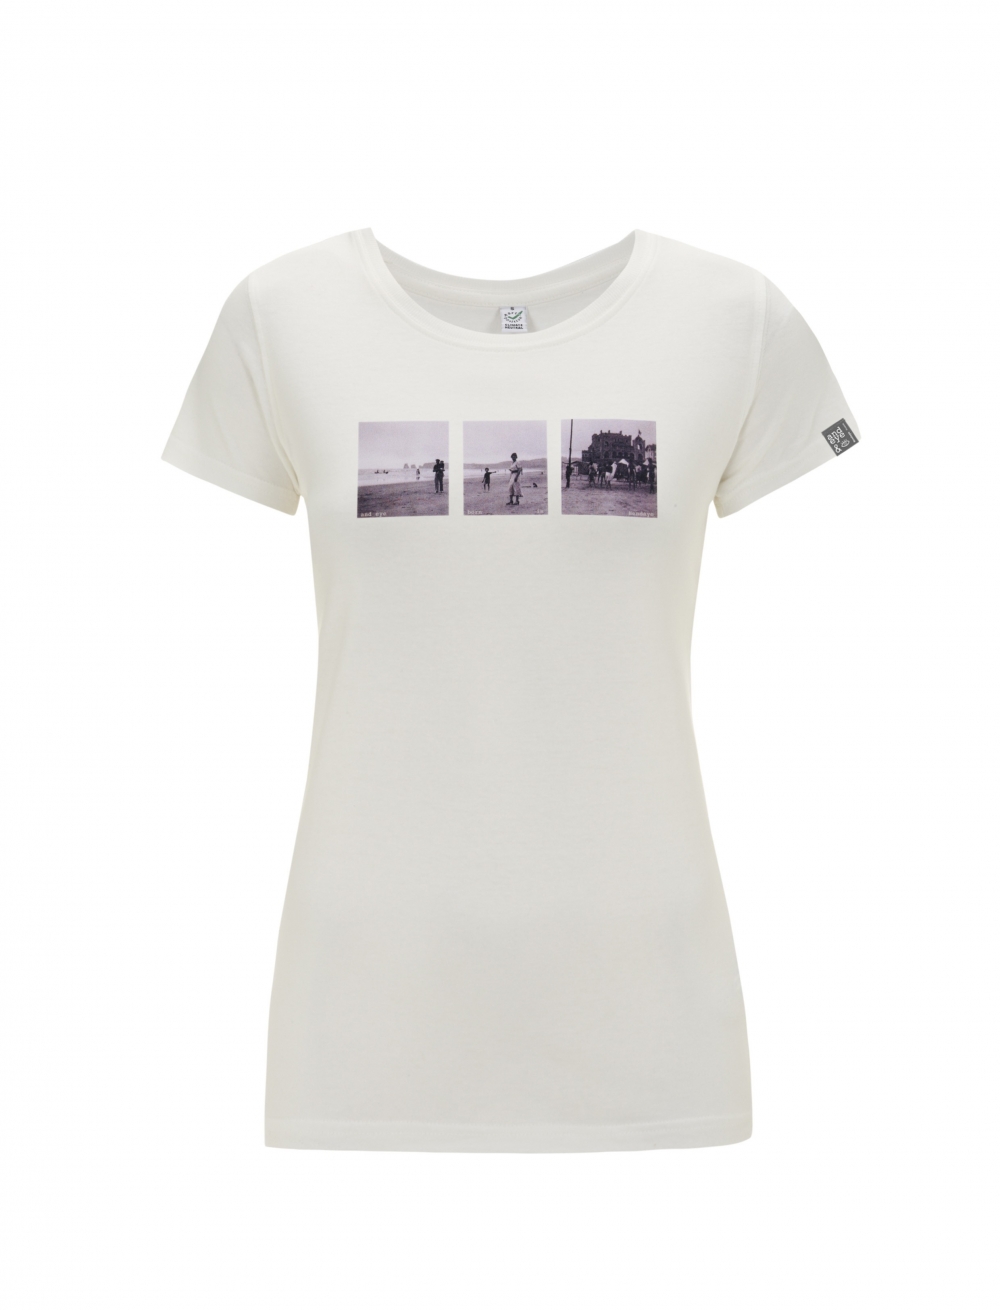 Vintage tee-shirt wiht vintage image of French Basque country